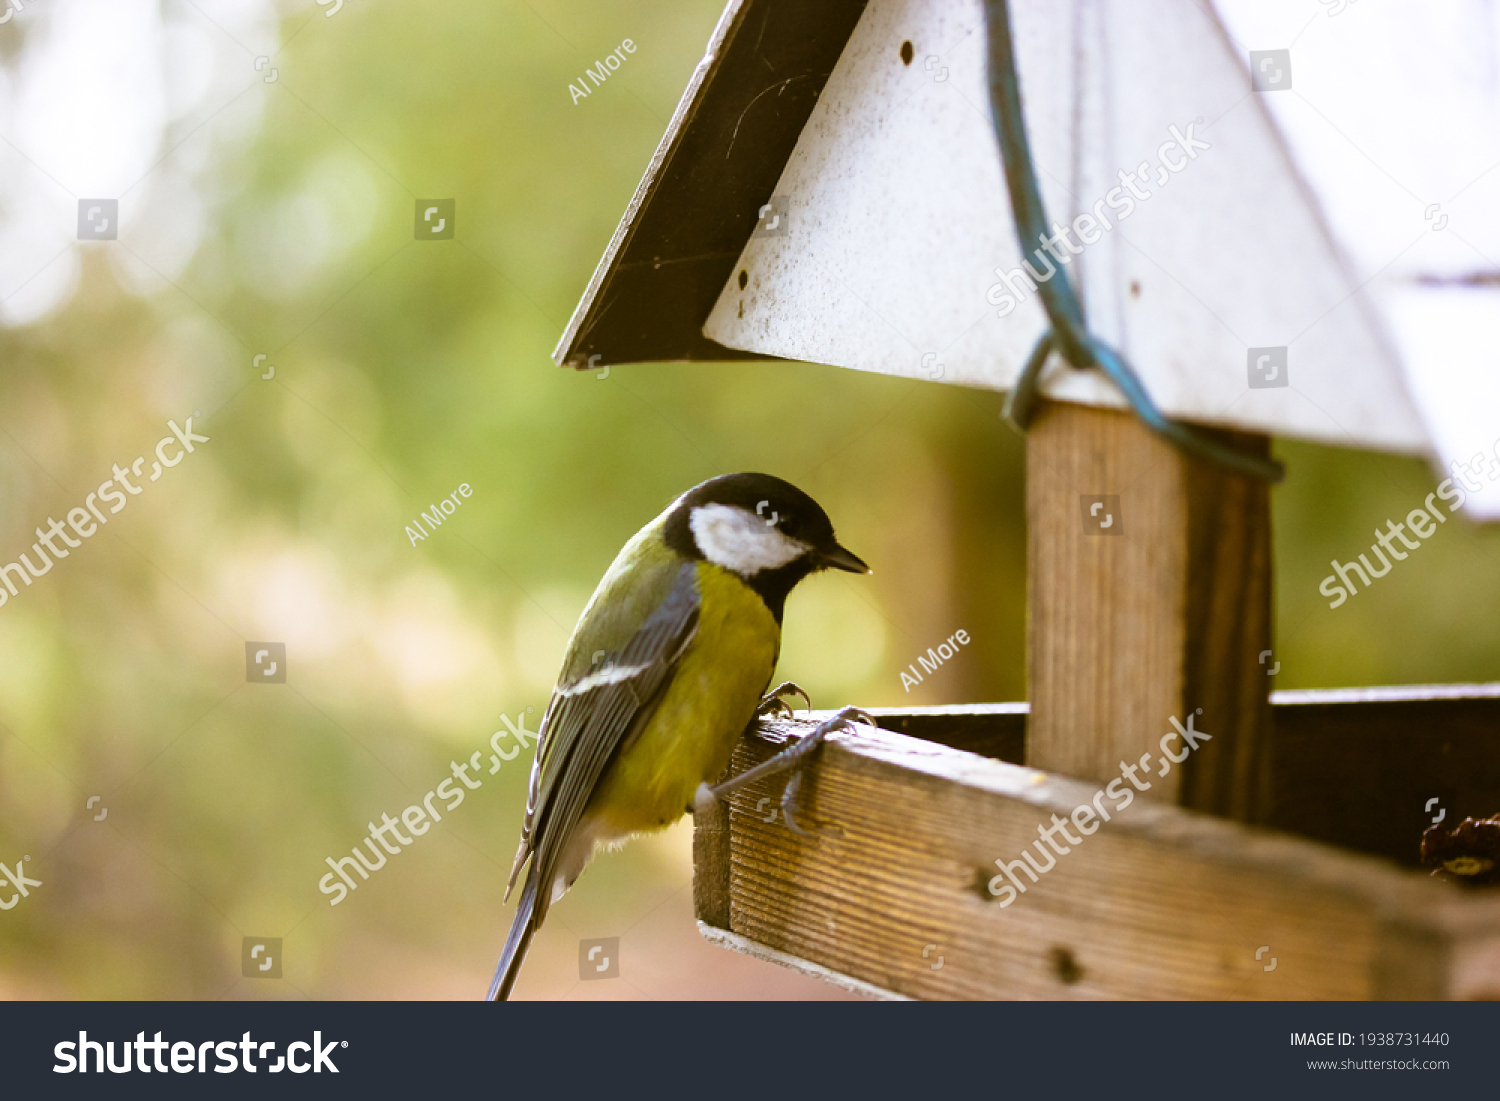 A tit eats food from a bird feeder. wooden bird house. Yellow little bird in the park on a sunny day. Protection of nature and the environment concept. Hungry titmouse bird, latin name Parus major. #1938731440